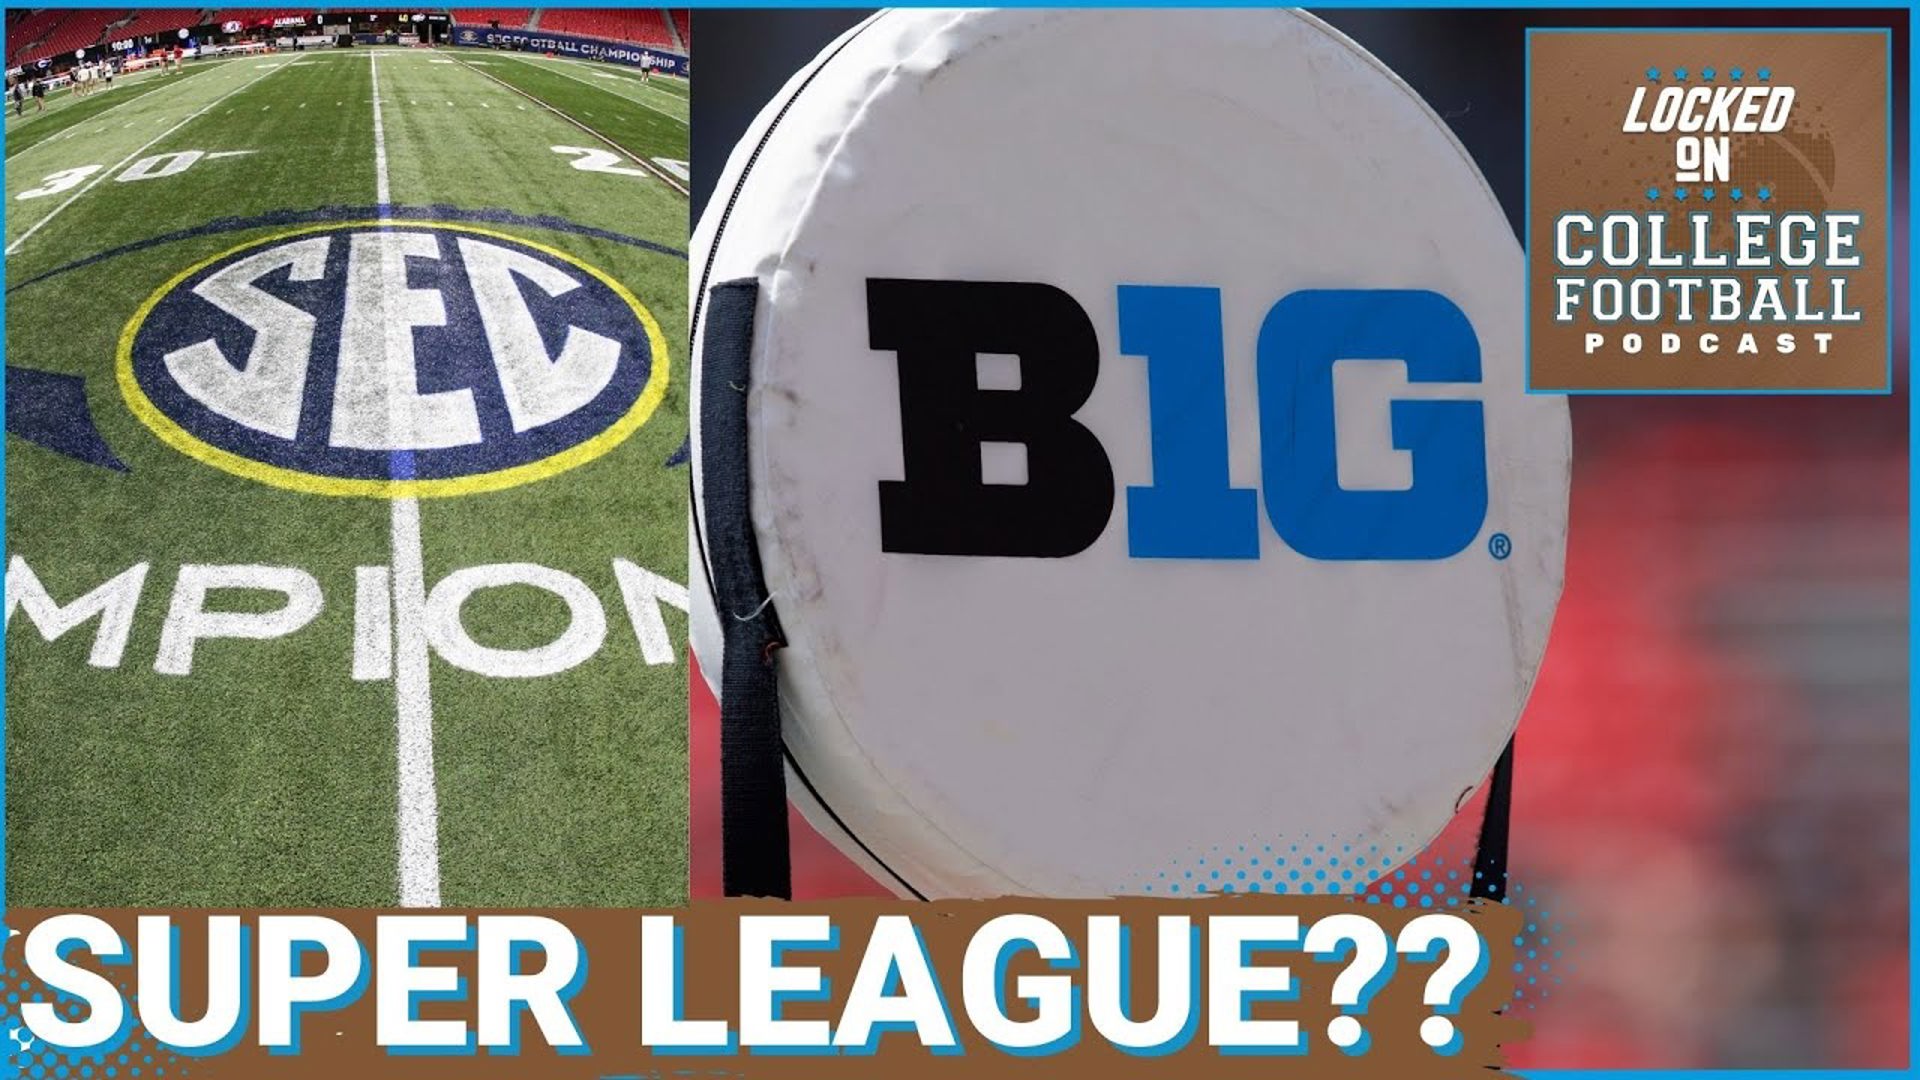 The Big 10 and SEC are already set to dominate College Football for the foreseeable future, could they form a super league one day?